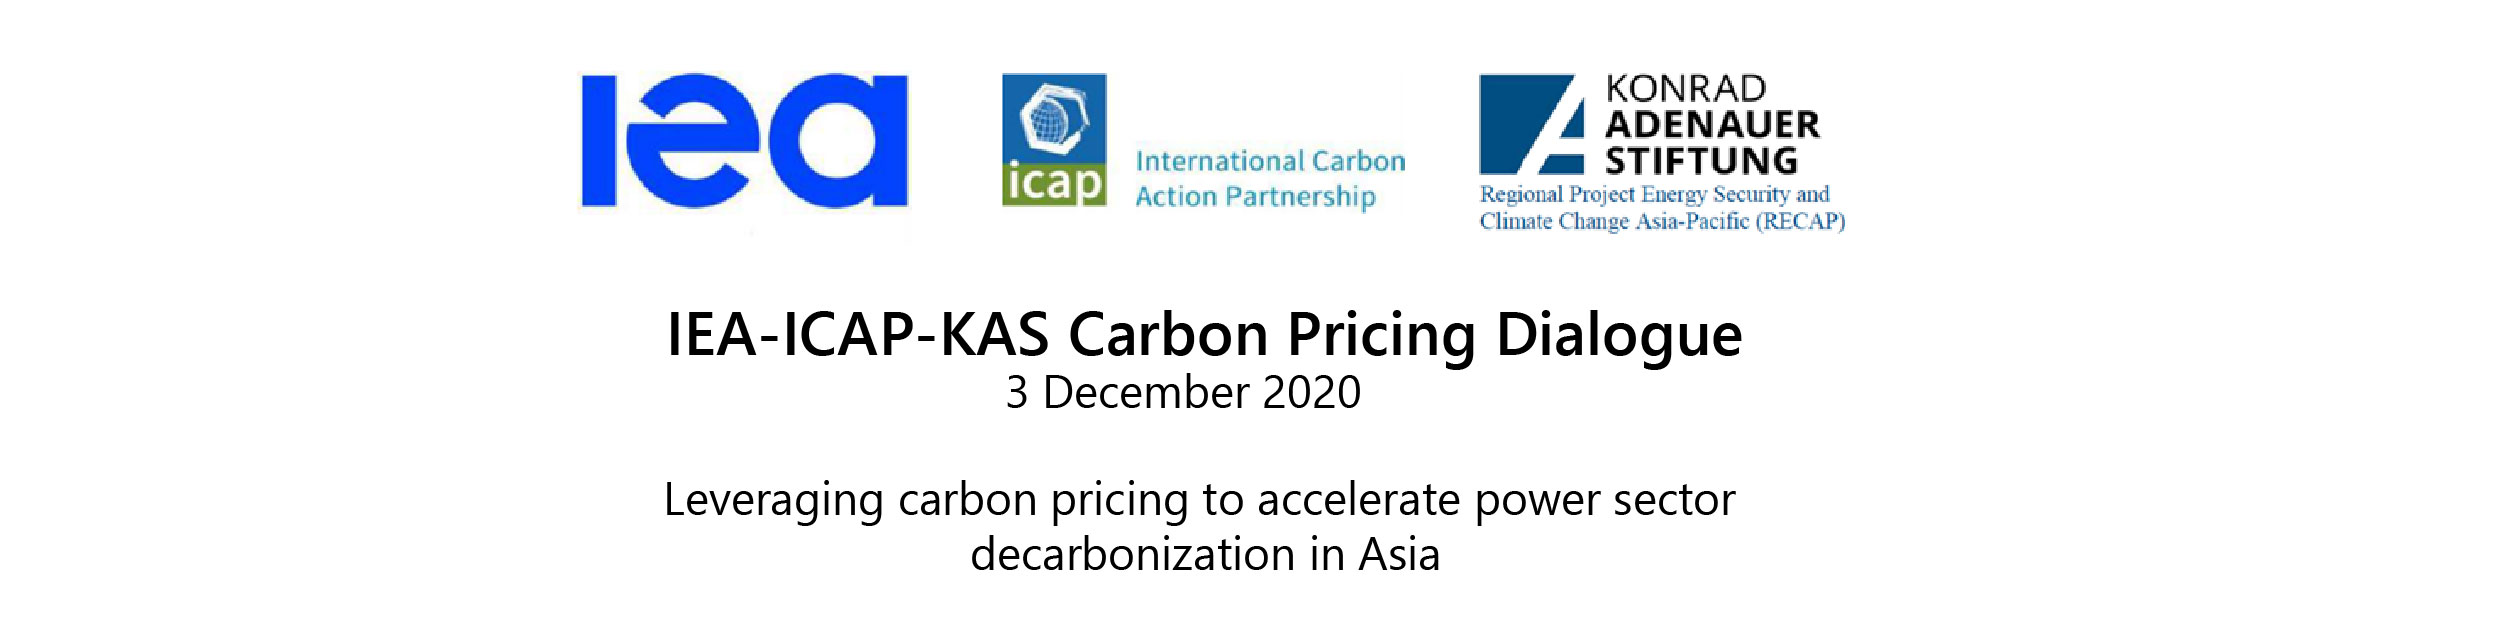 Leveraging Carbon Pricing to Accelerate Power Sector Decarbonization in Asia